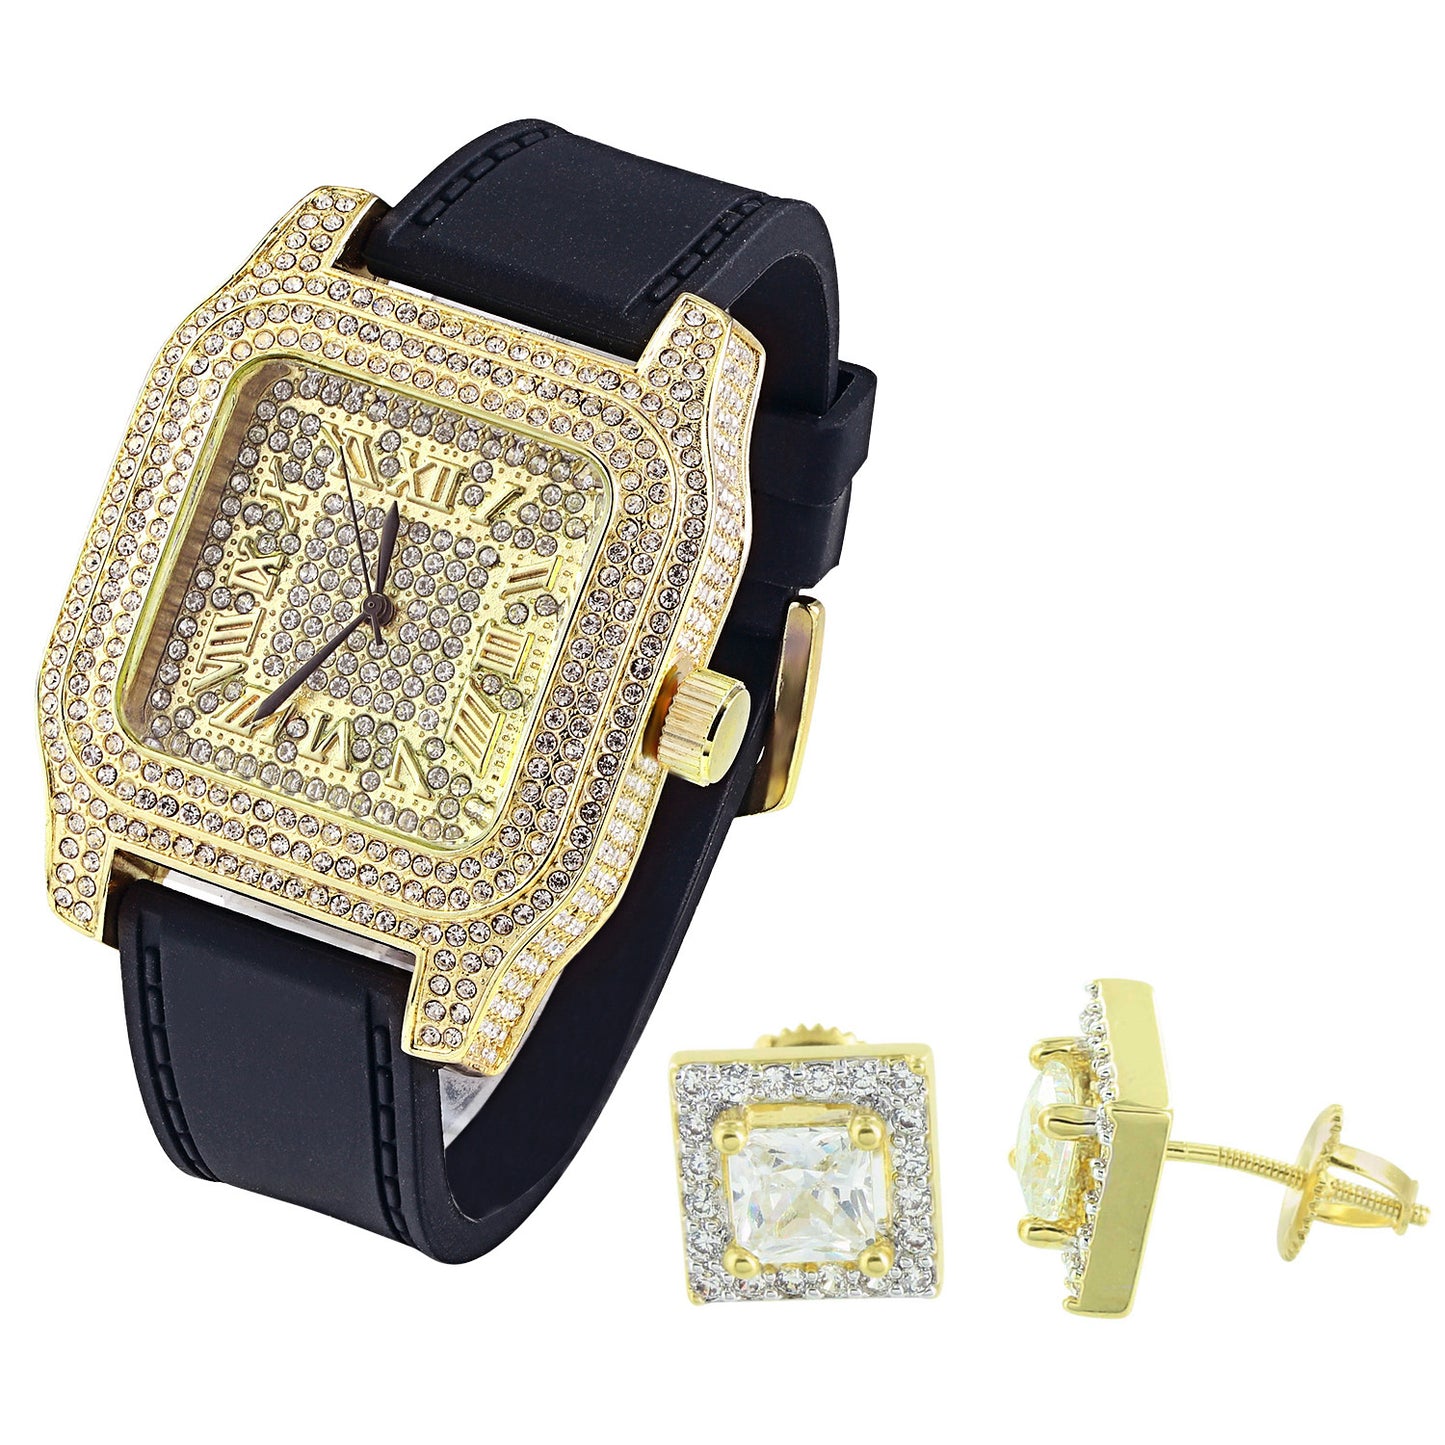 Hip Hop Men's Square Face 14k Yellow Gold Finish Watch with Matching Earrings Combo Set